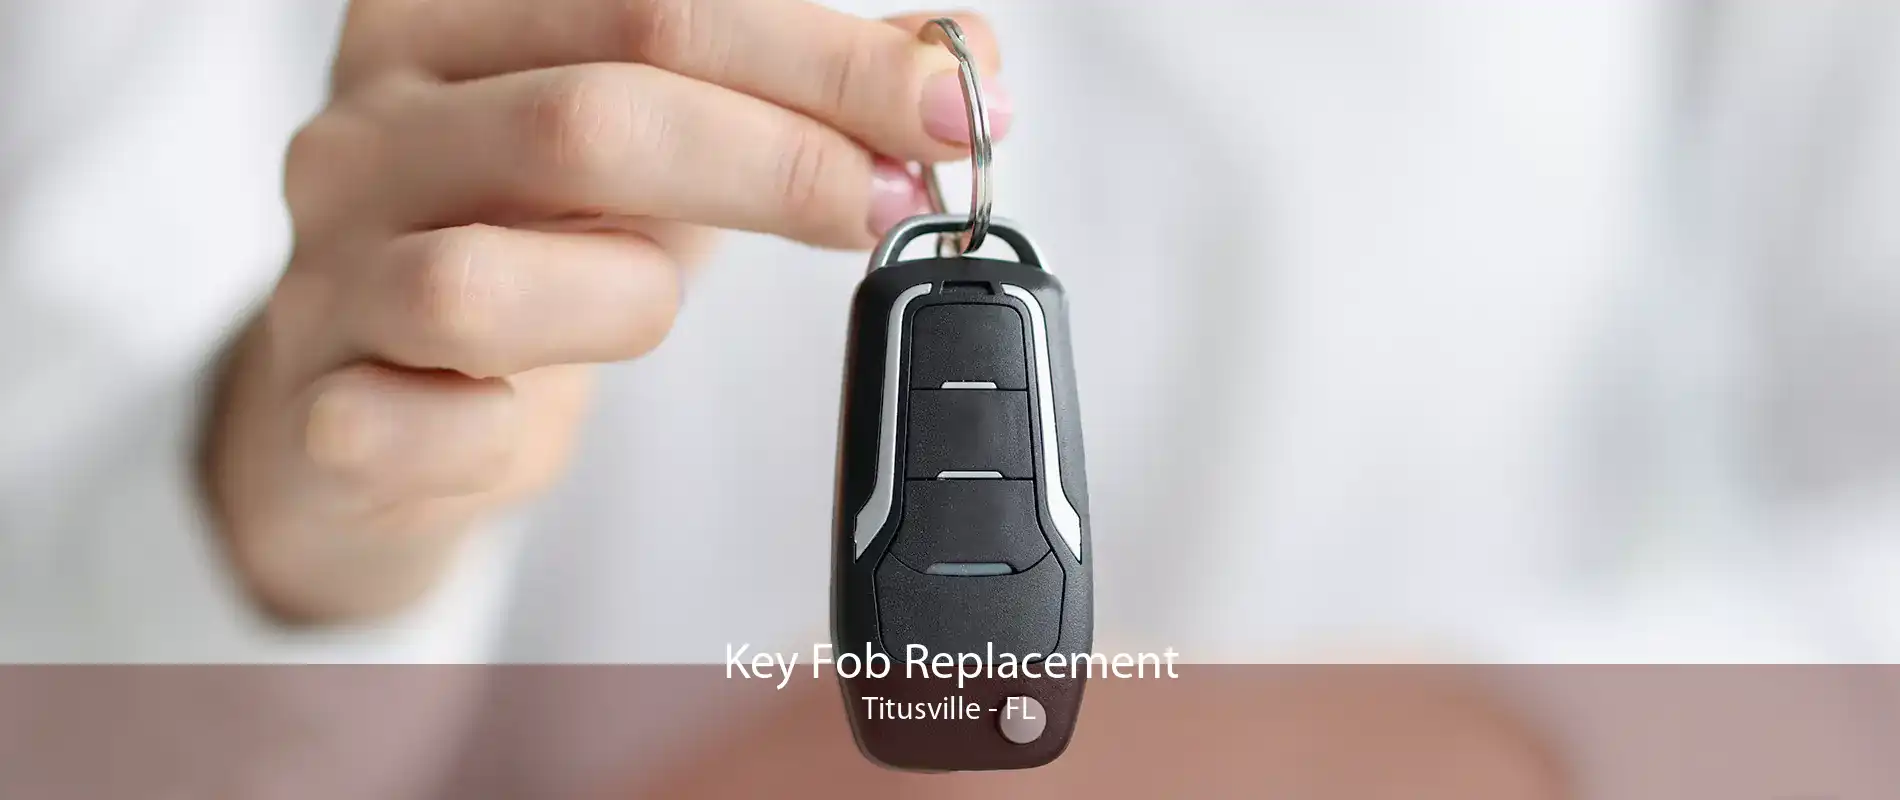 Key Fob Replacement Titusville - FL